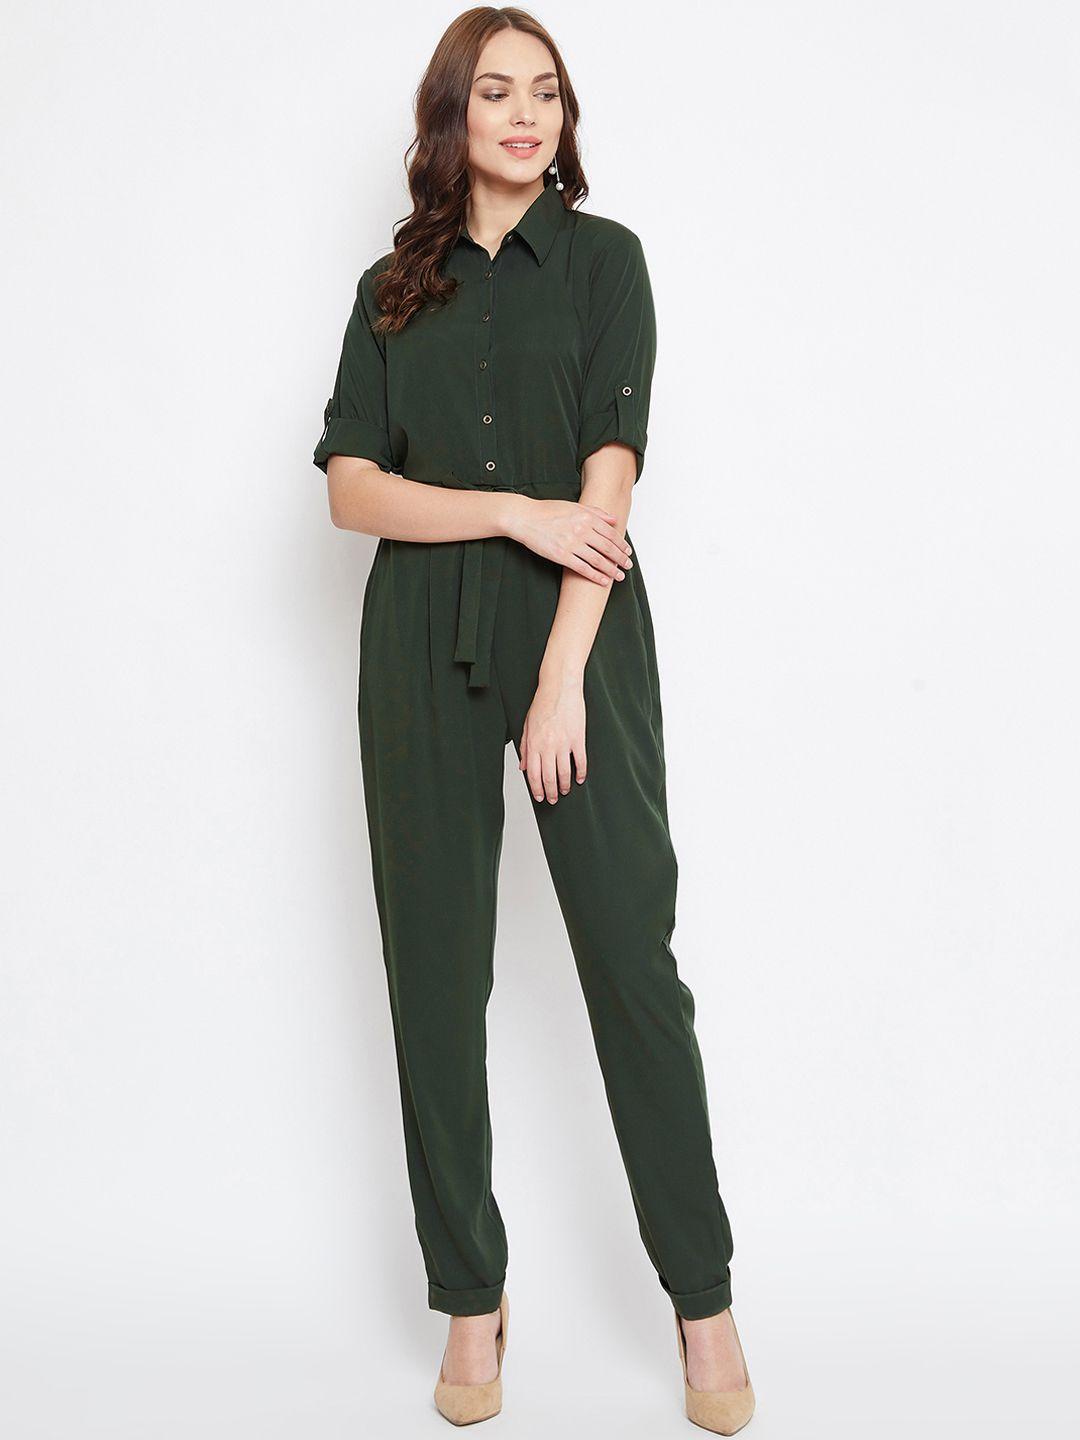 uptownie-lite-women-olive-green-solid-american-crepe-basic-jumpsuit-with-waist-tie-up